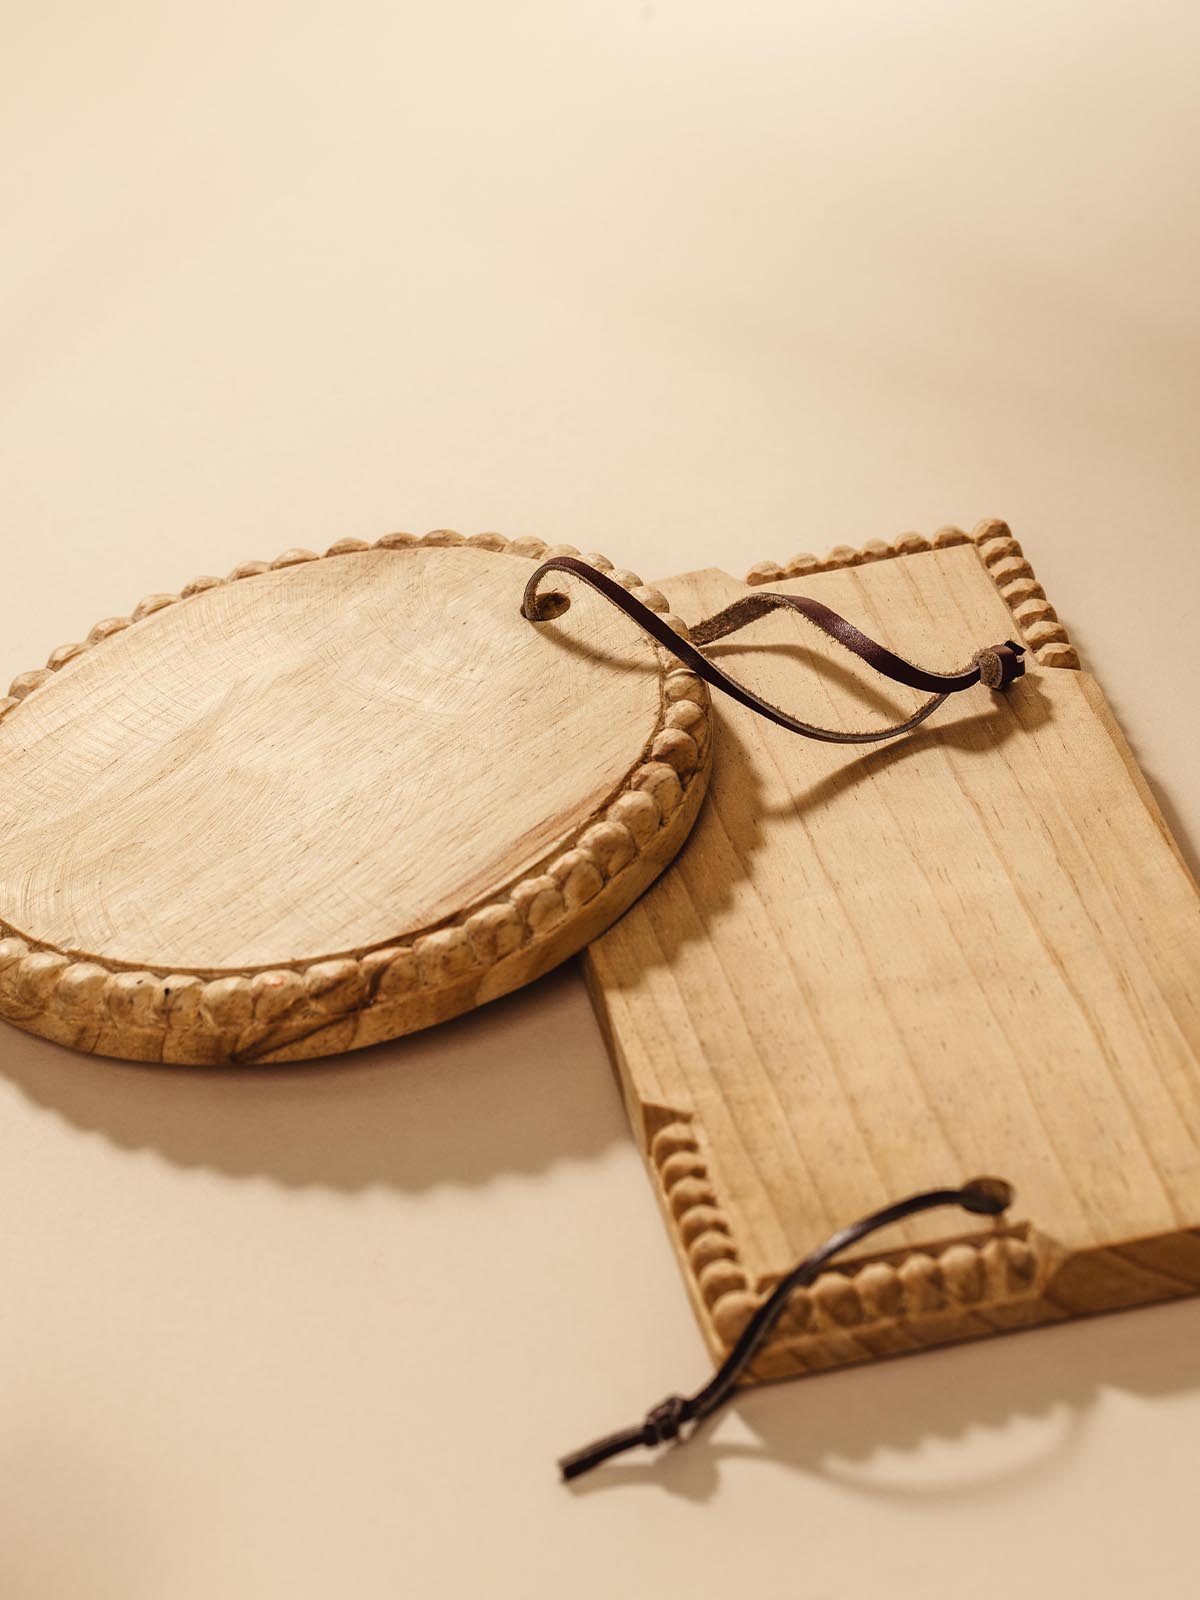 Round and Rectangle wooden serving tray on beige background